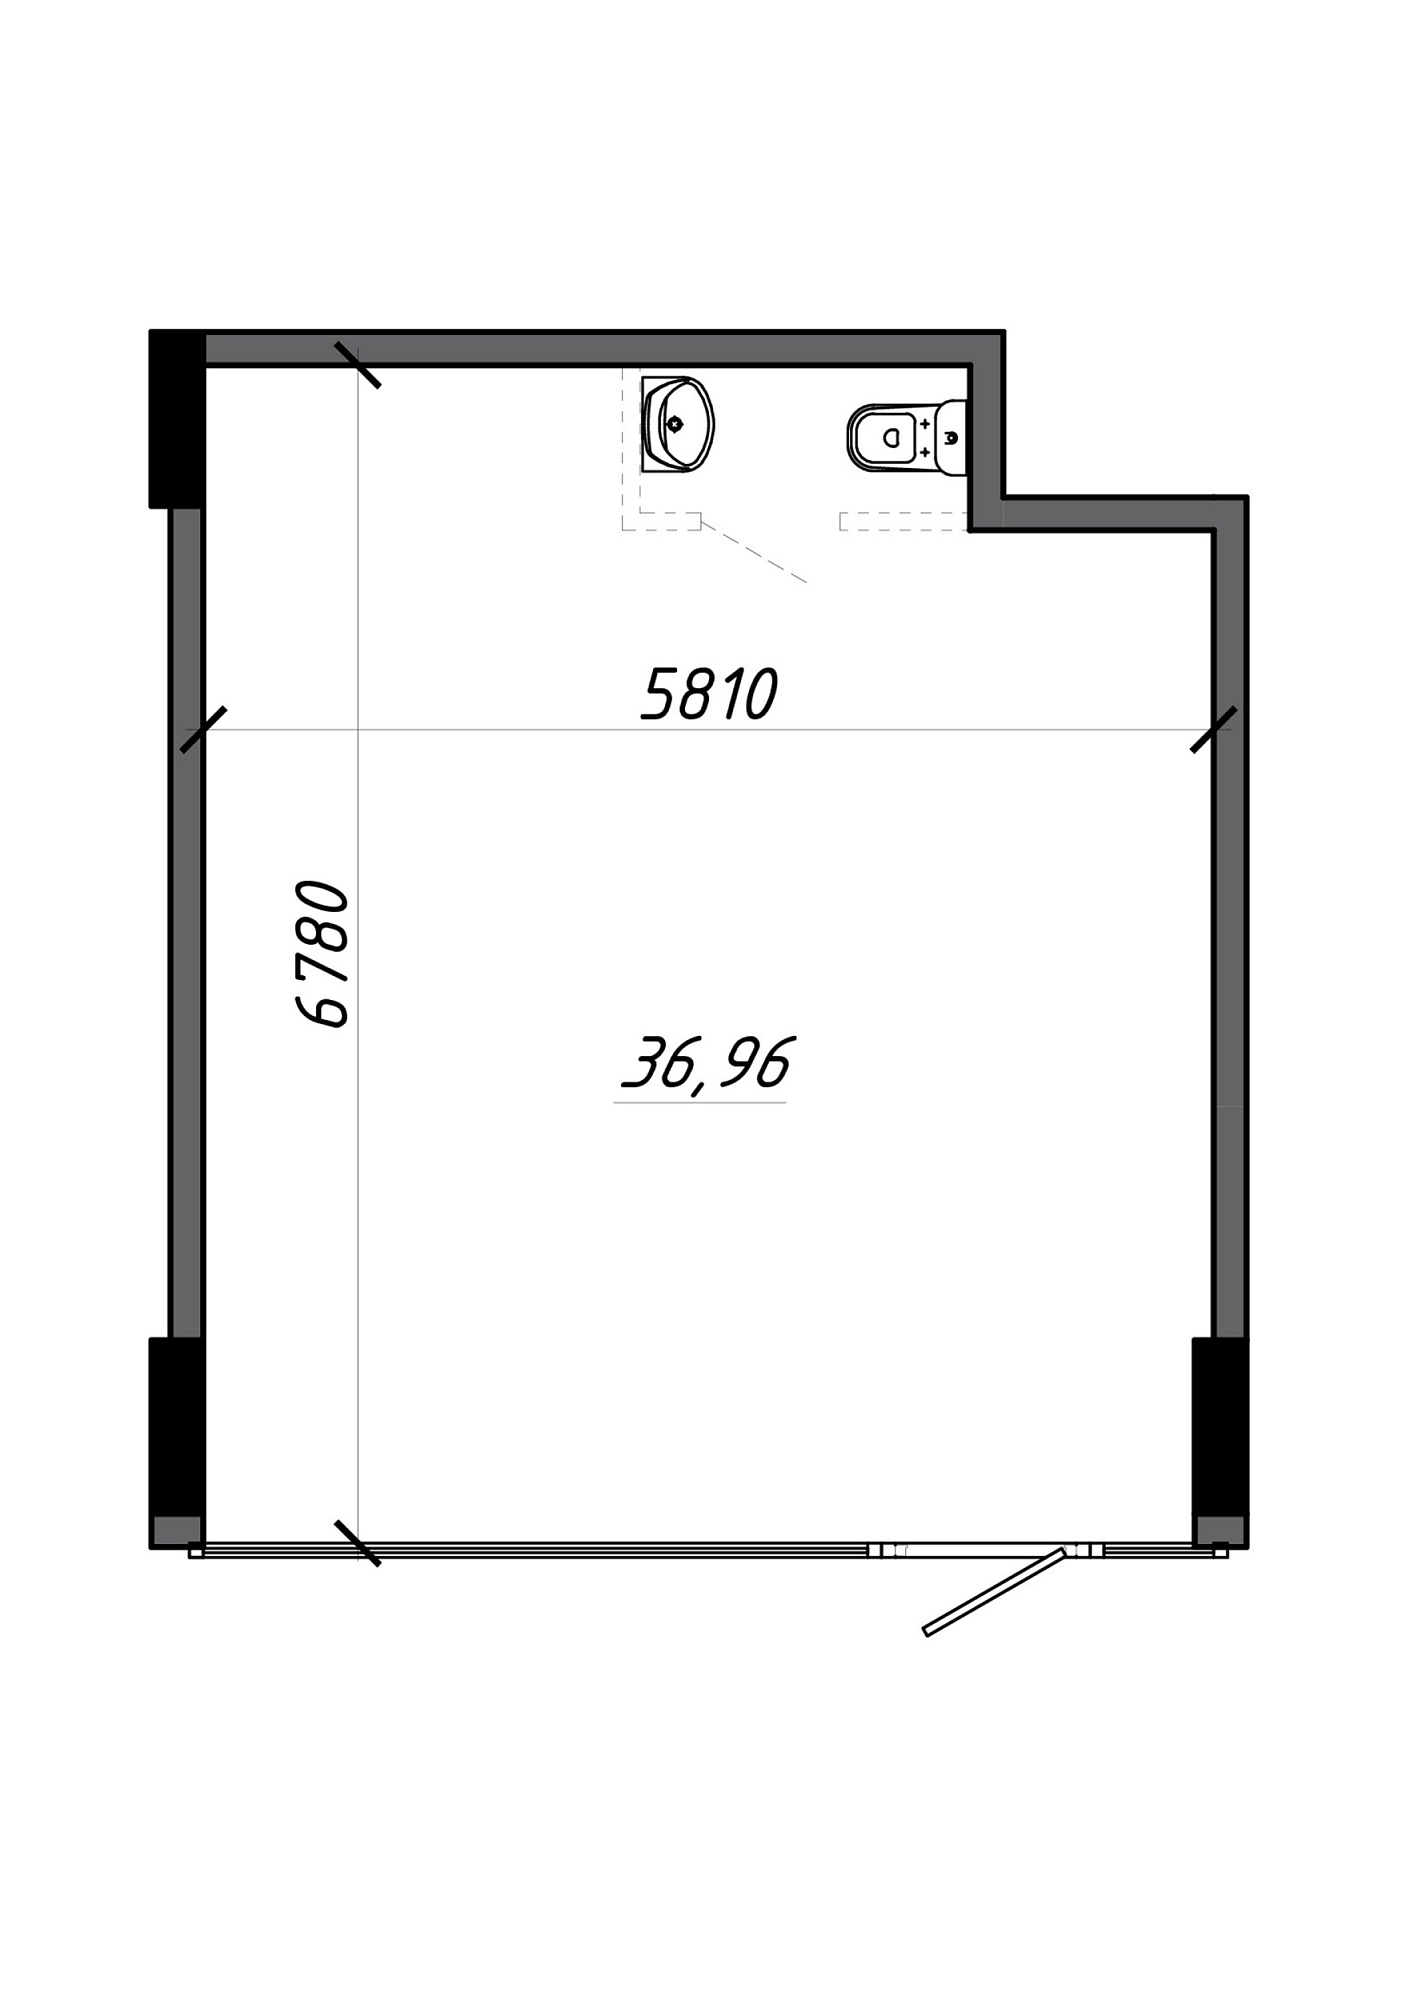 Planning Commercial premises area 39.2m2, AB-21-м1/Т0005.